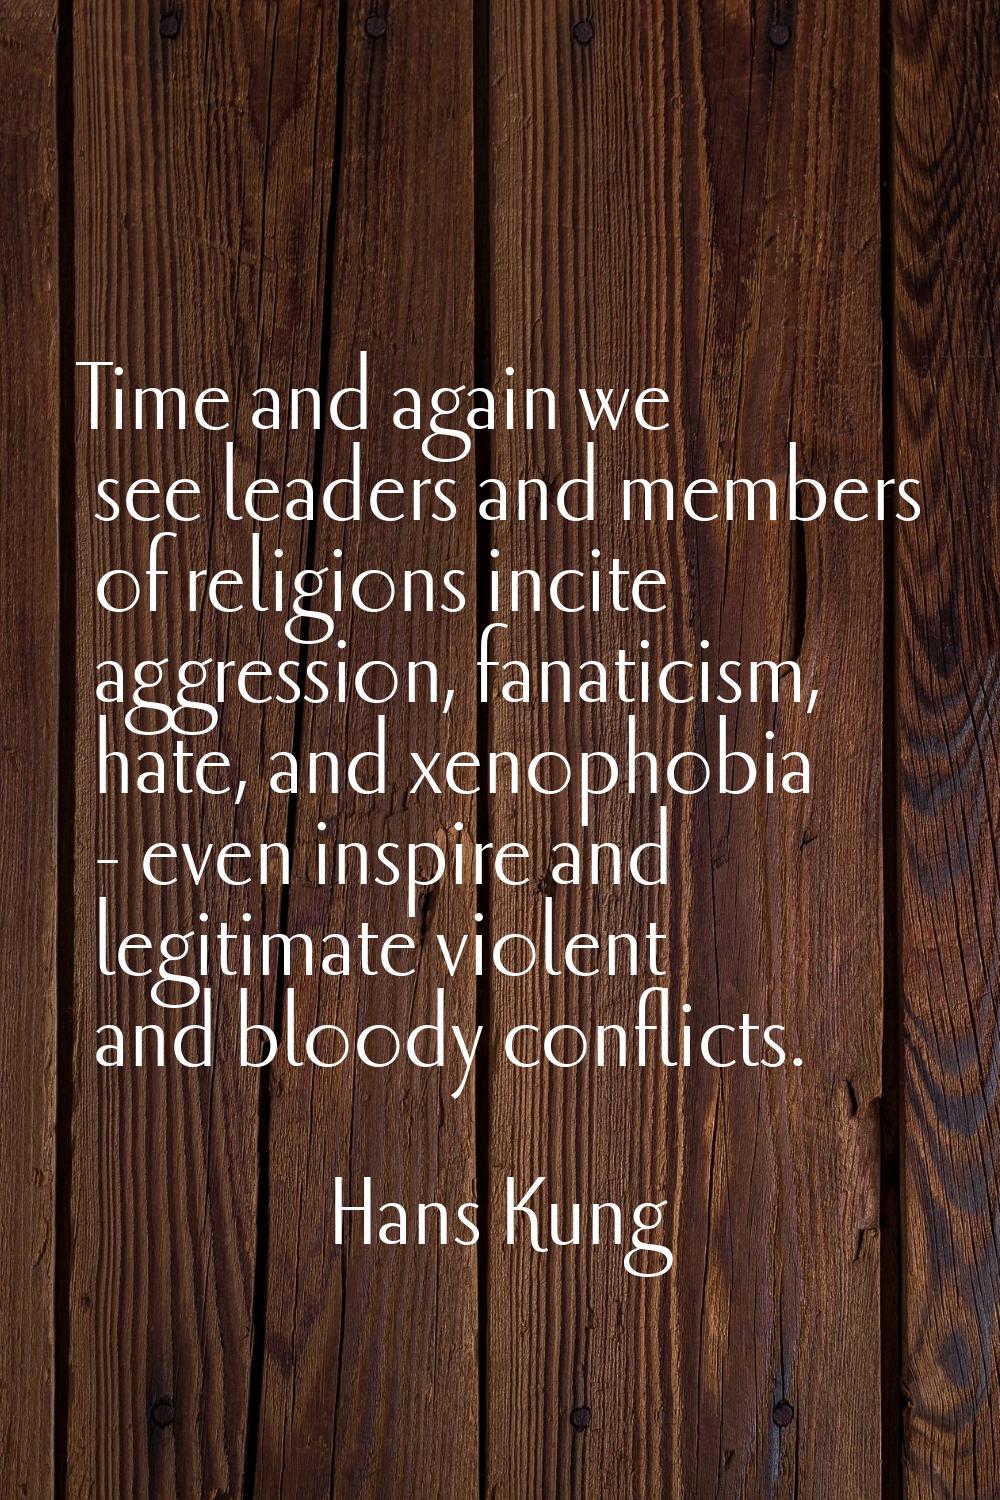 Time and again we see leaders and members of religions incite aggression, fanaticism, hate, and xen